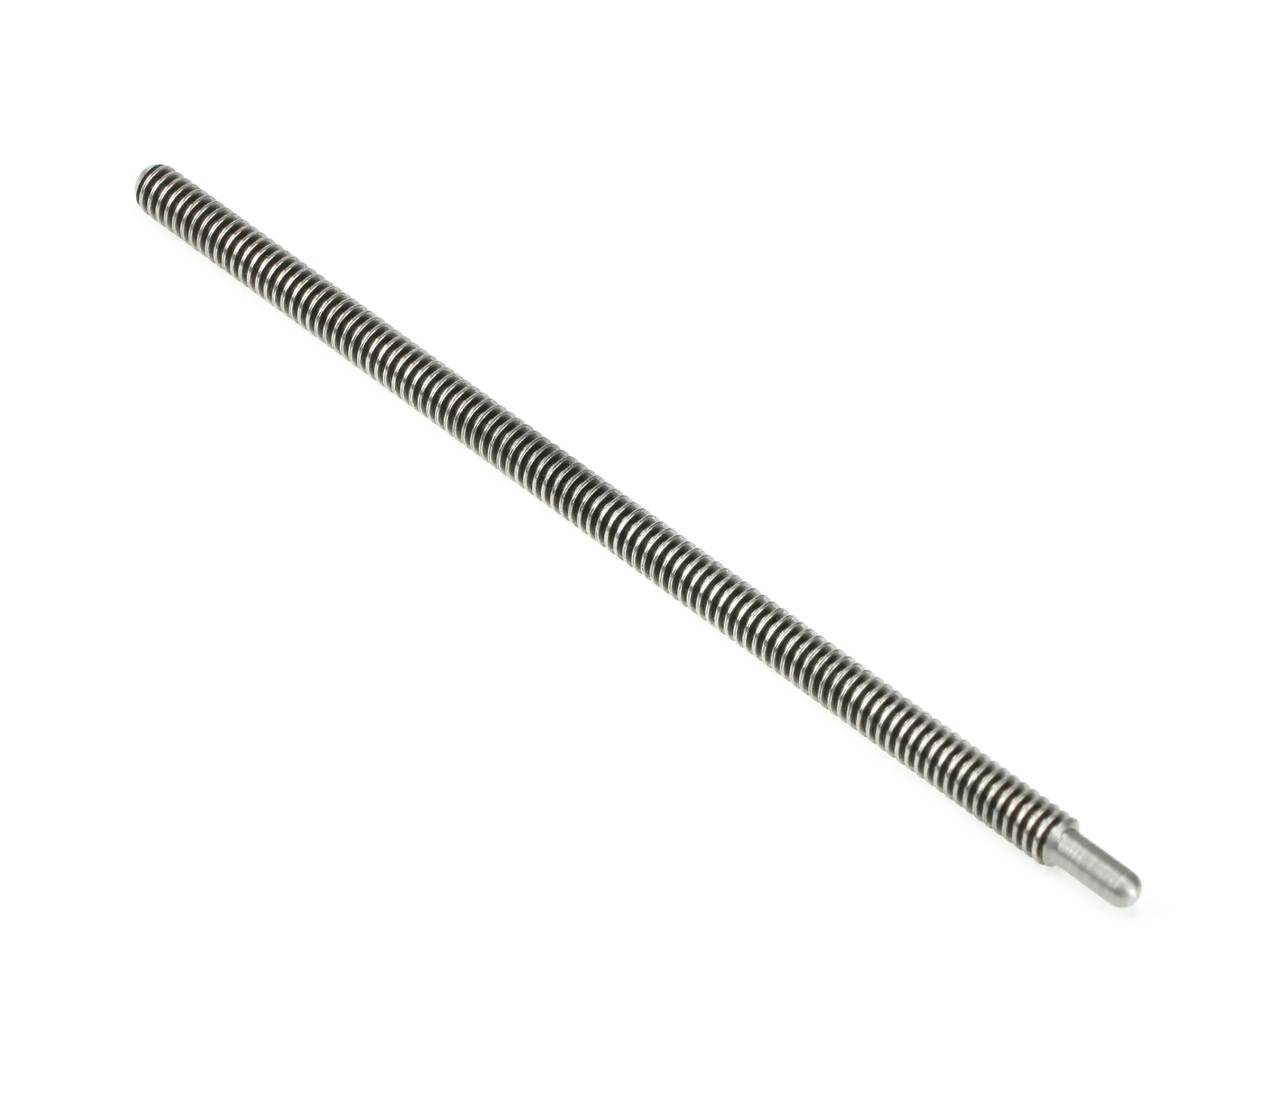 Enduro BBT-008 - Replacement Threaded Rod for BRT-002 or BRT-003 tools